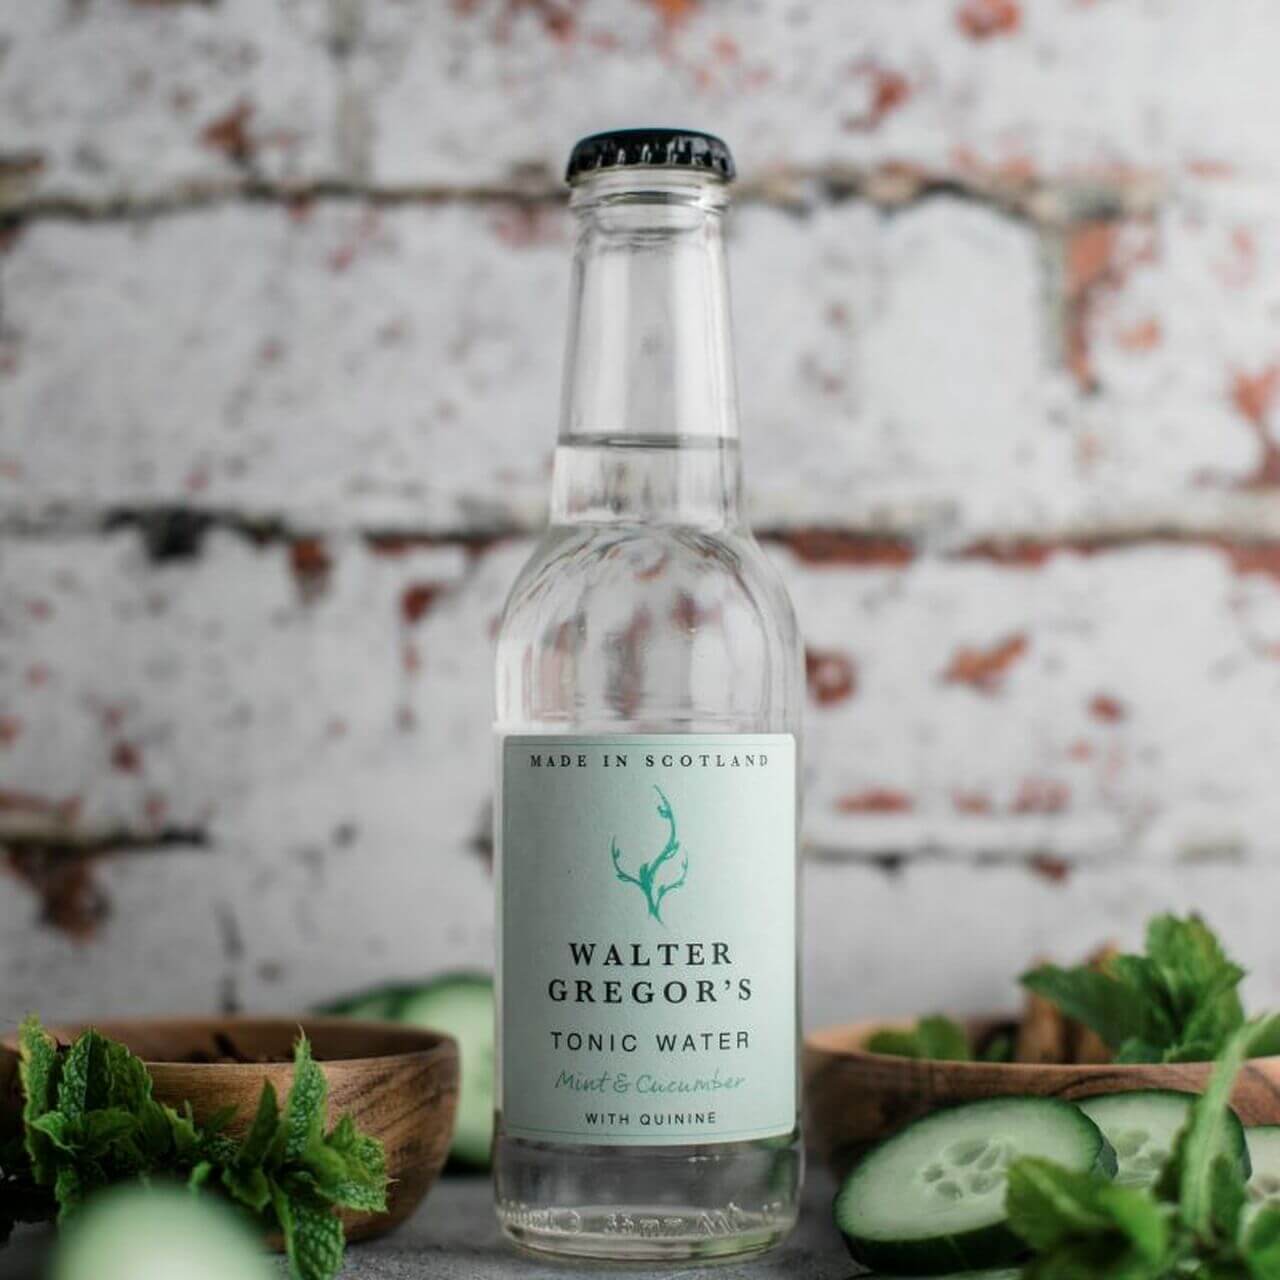 Image of Tonic Water by Walter Gregor's, designed, produced or made in the UK. Buying this product supports a UK business, jobs and the local community.